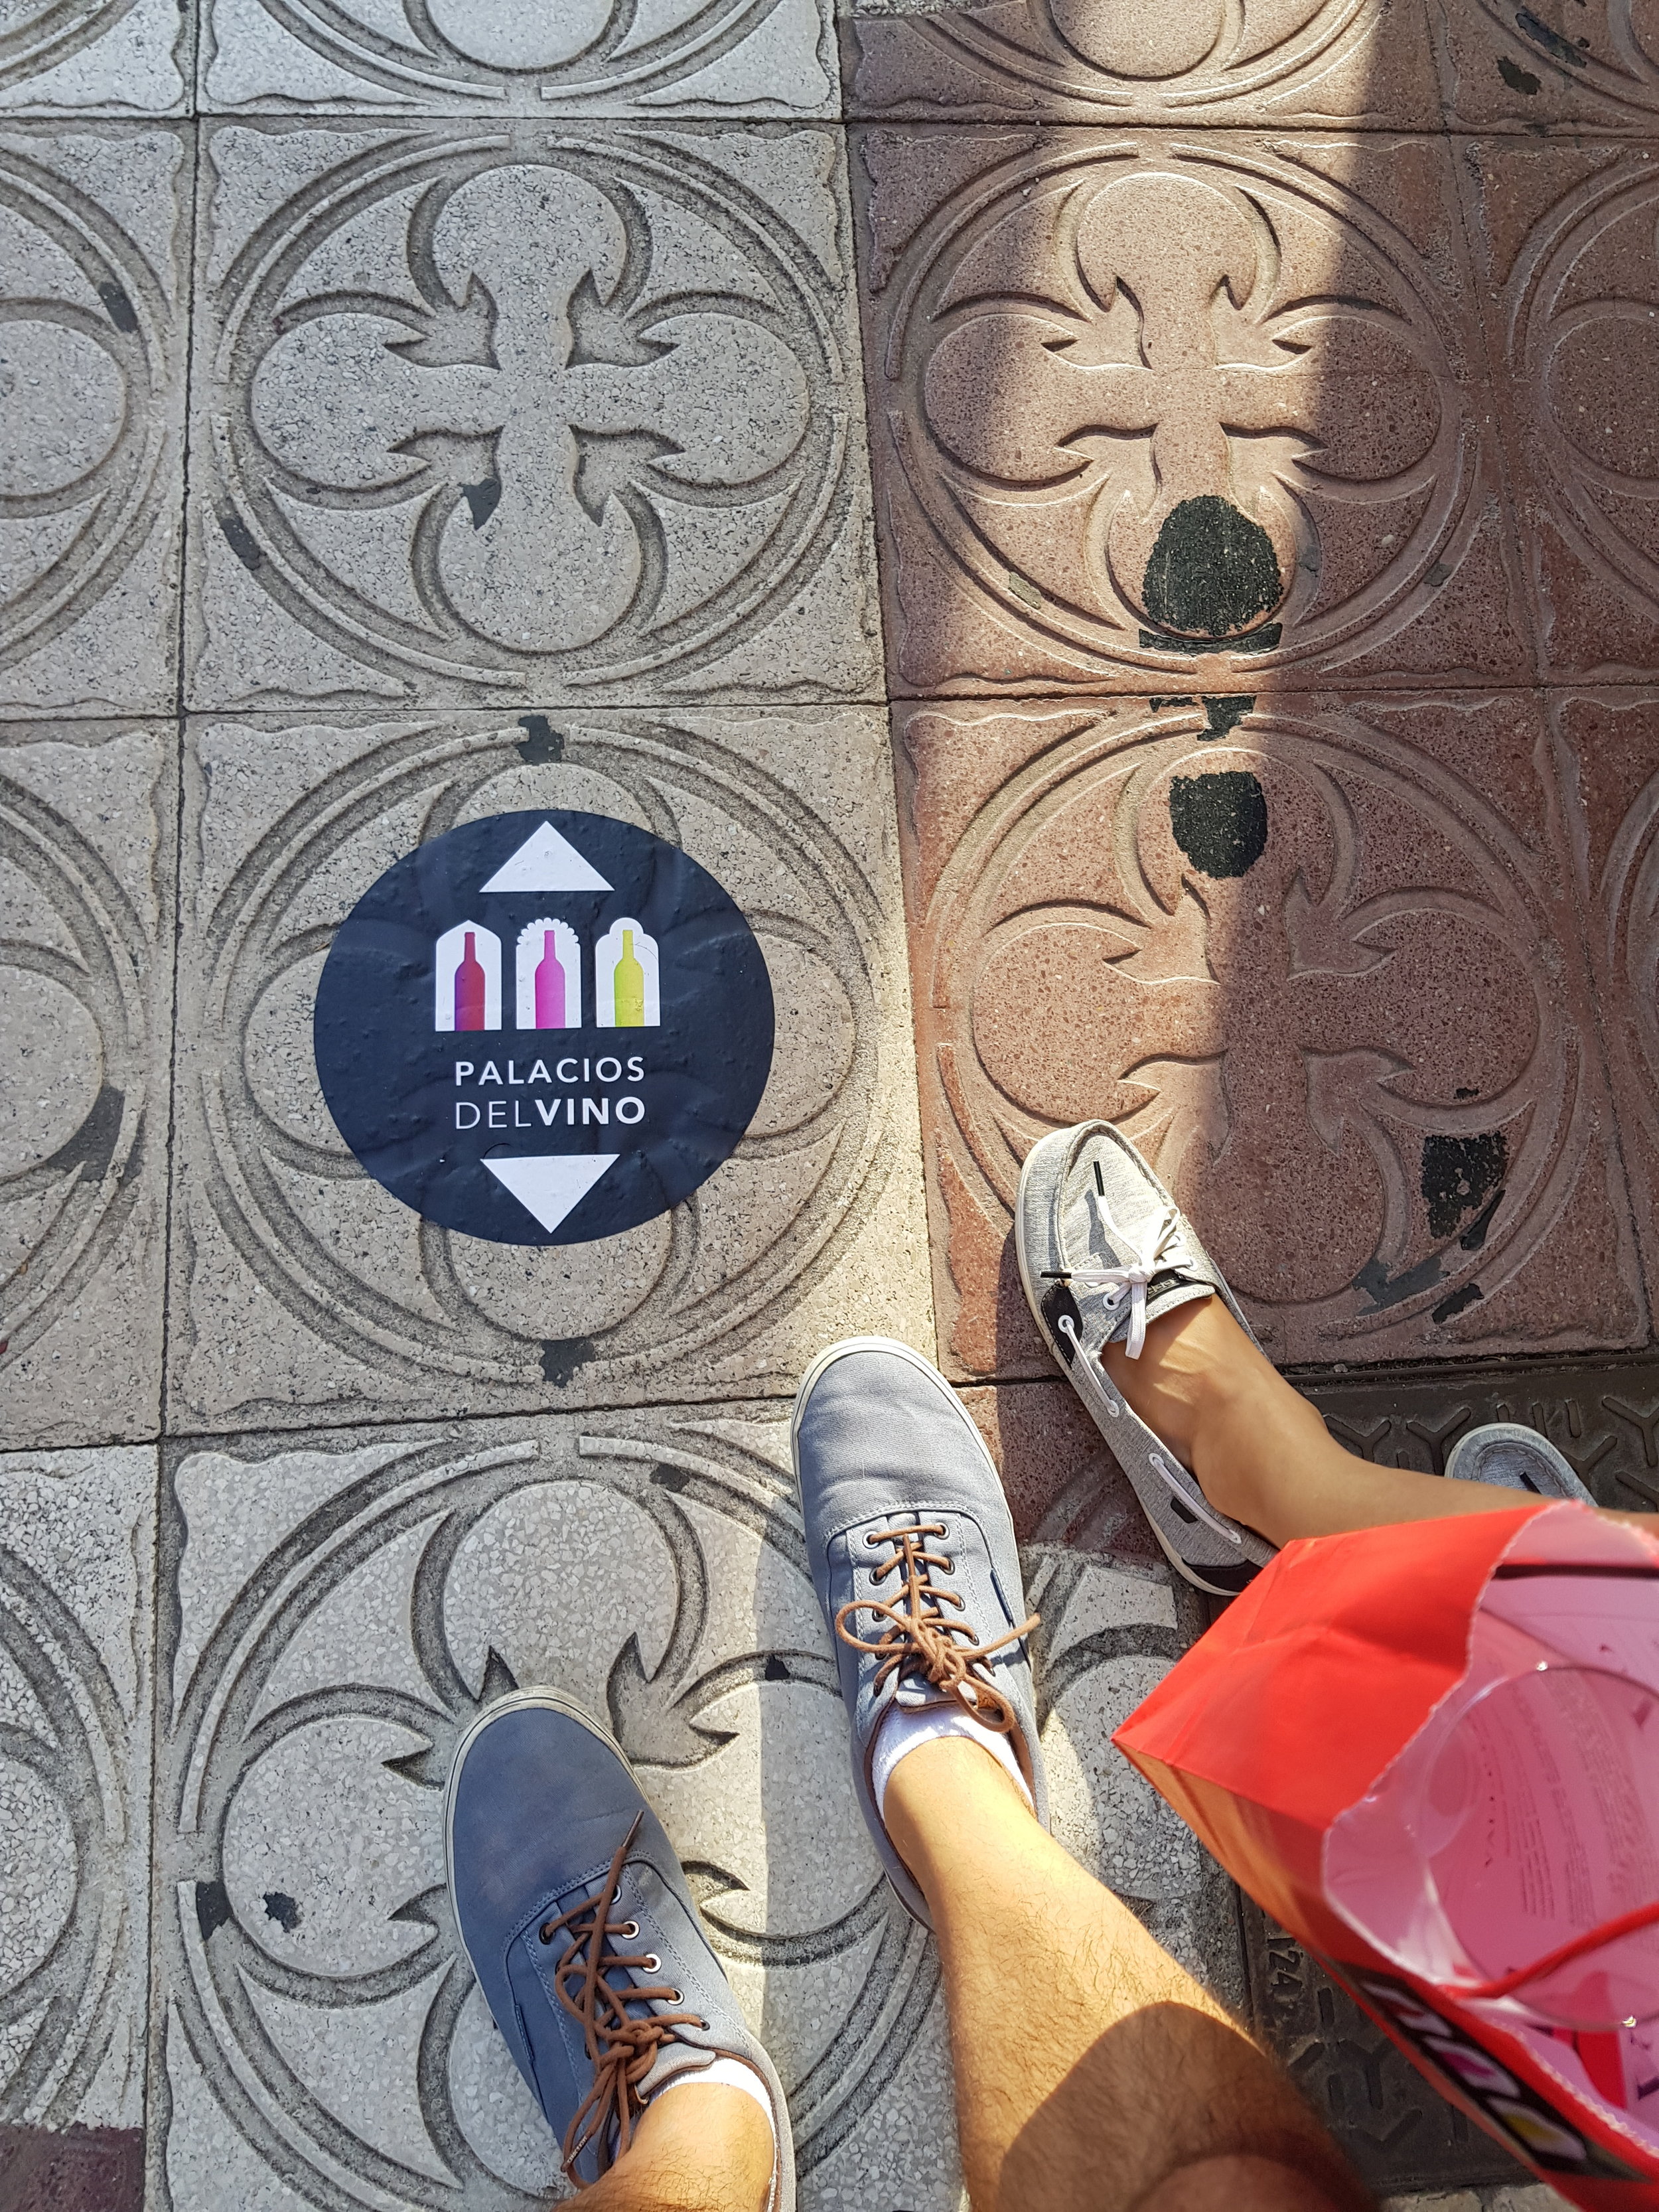 The Palacios de Vinos event provided us the most unique tour of Burgos and it felt like such an adventure following these stickers to the next location.